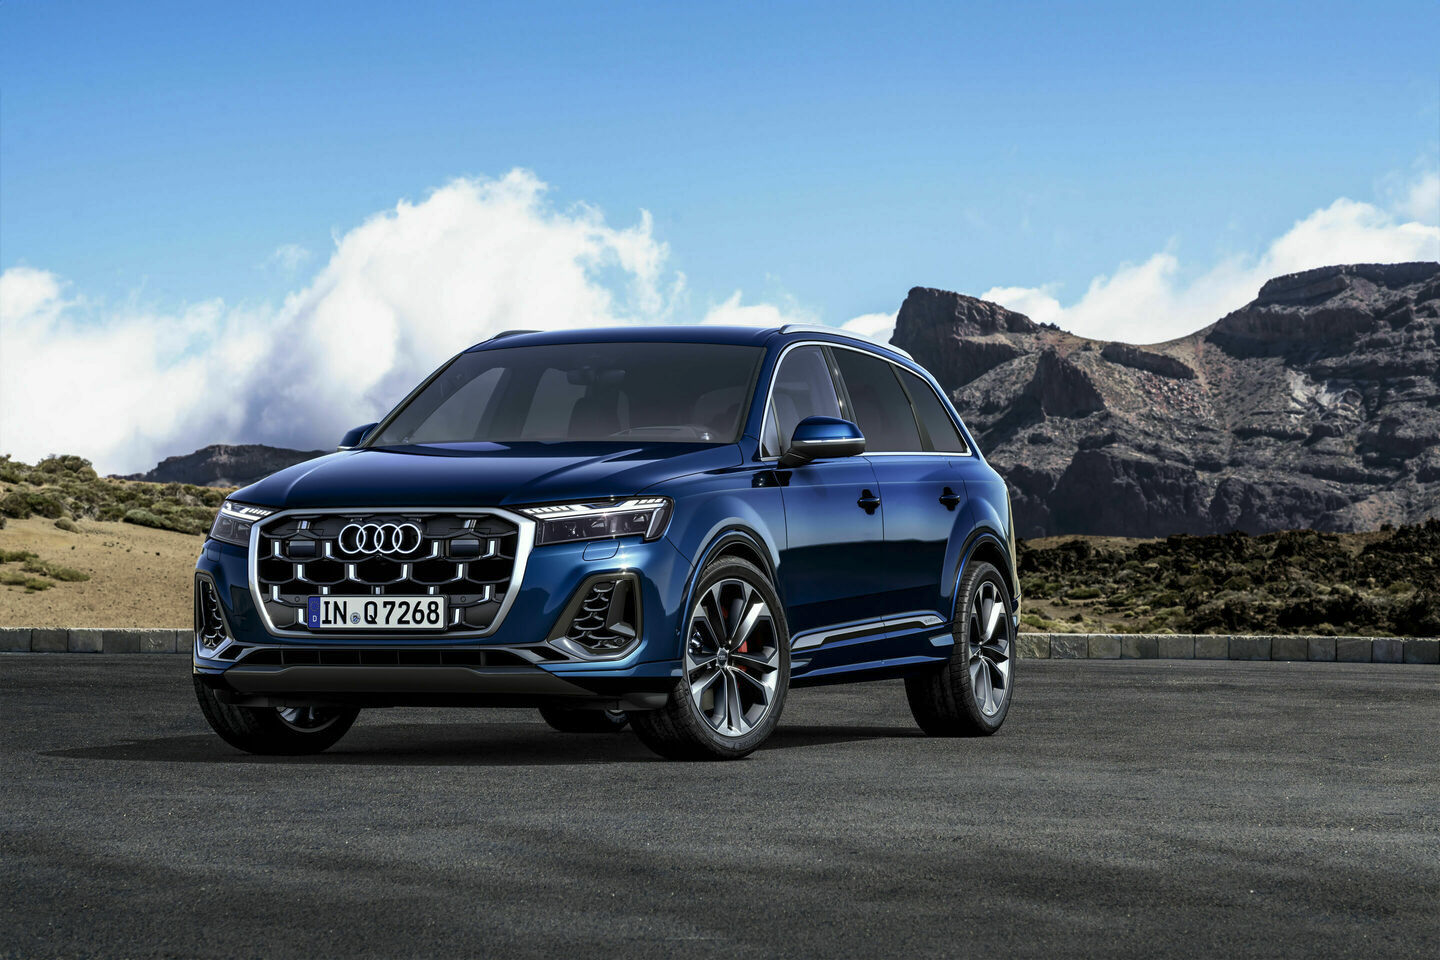 <p>The Audi Q7’s journey of success began in 2003 as a concept car called the Audi Pikes Peak quattro at the North American International Motor Show. </p>